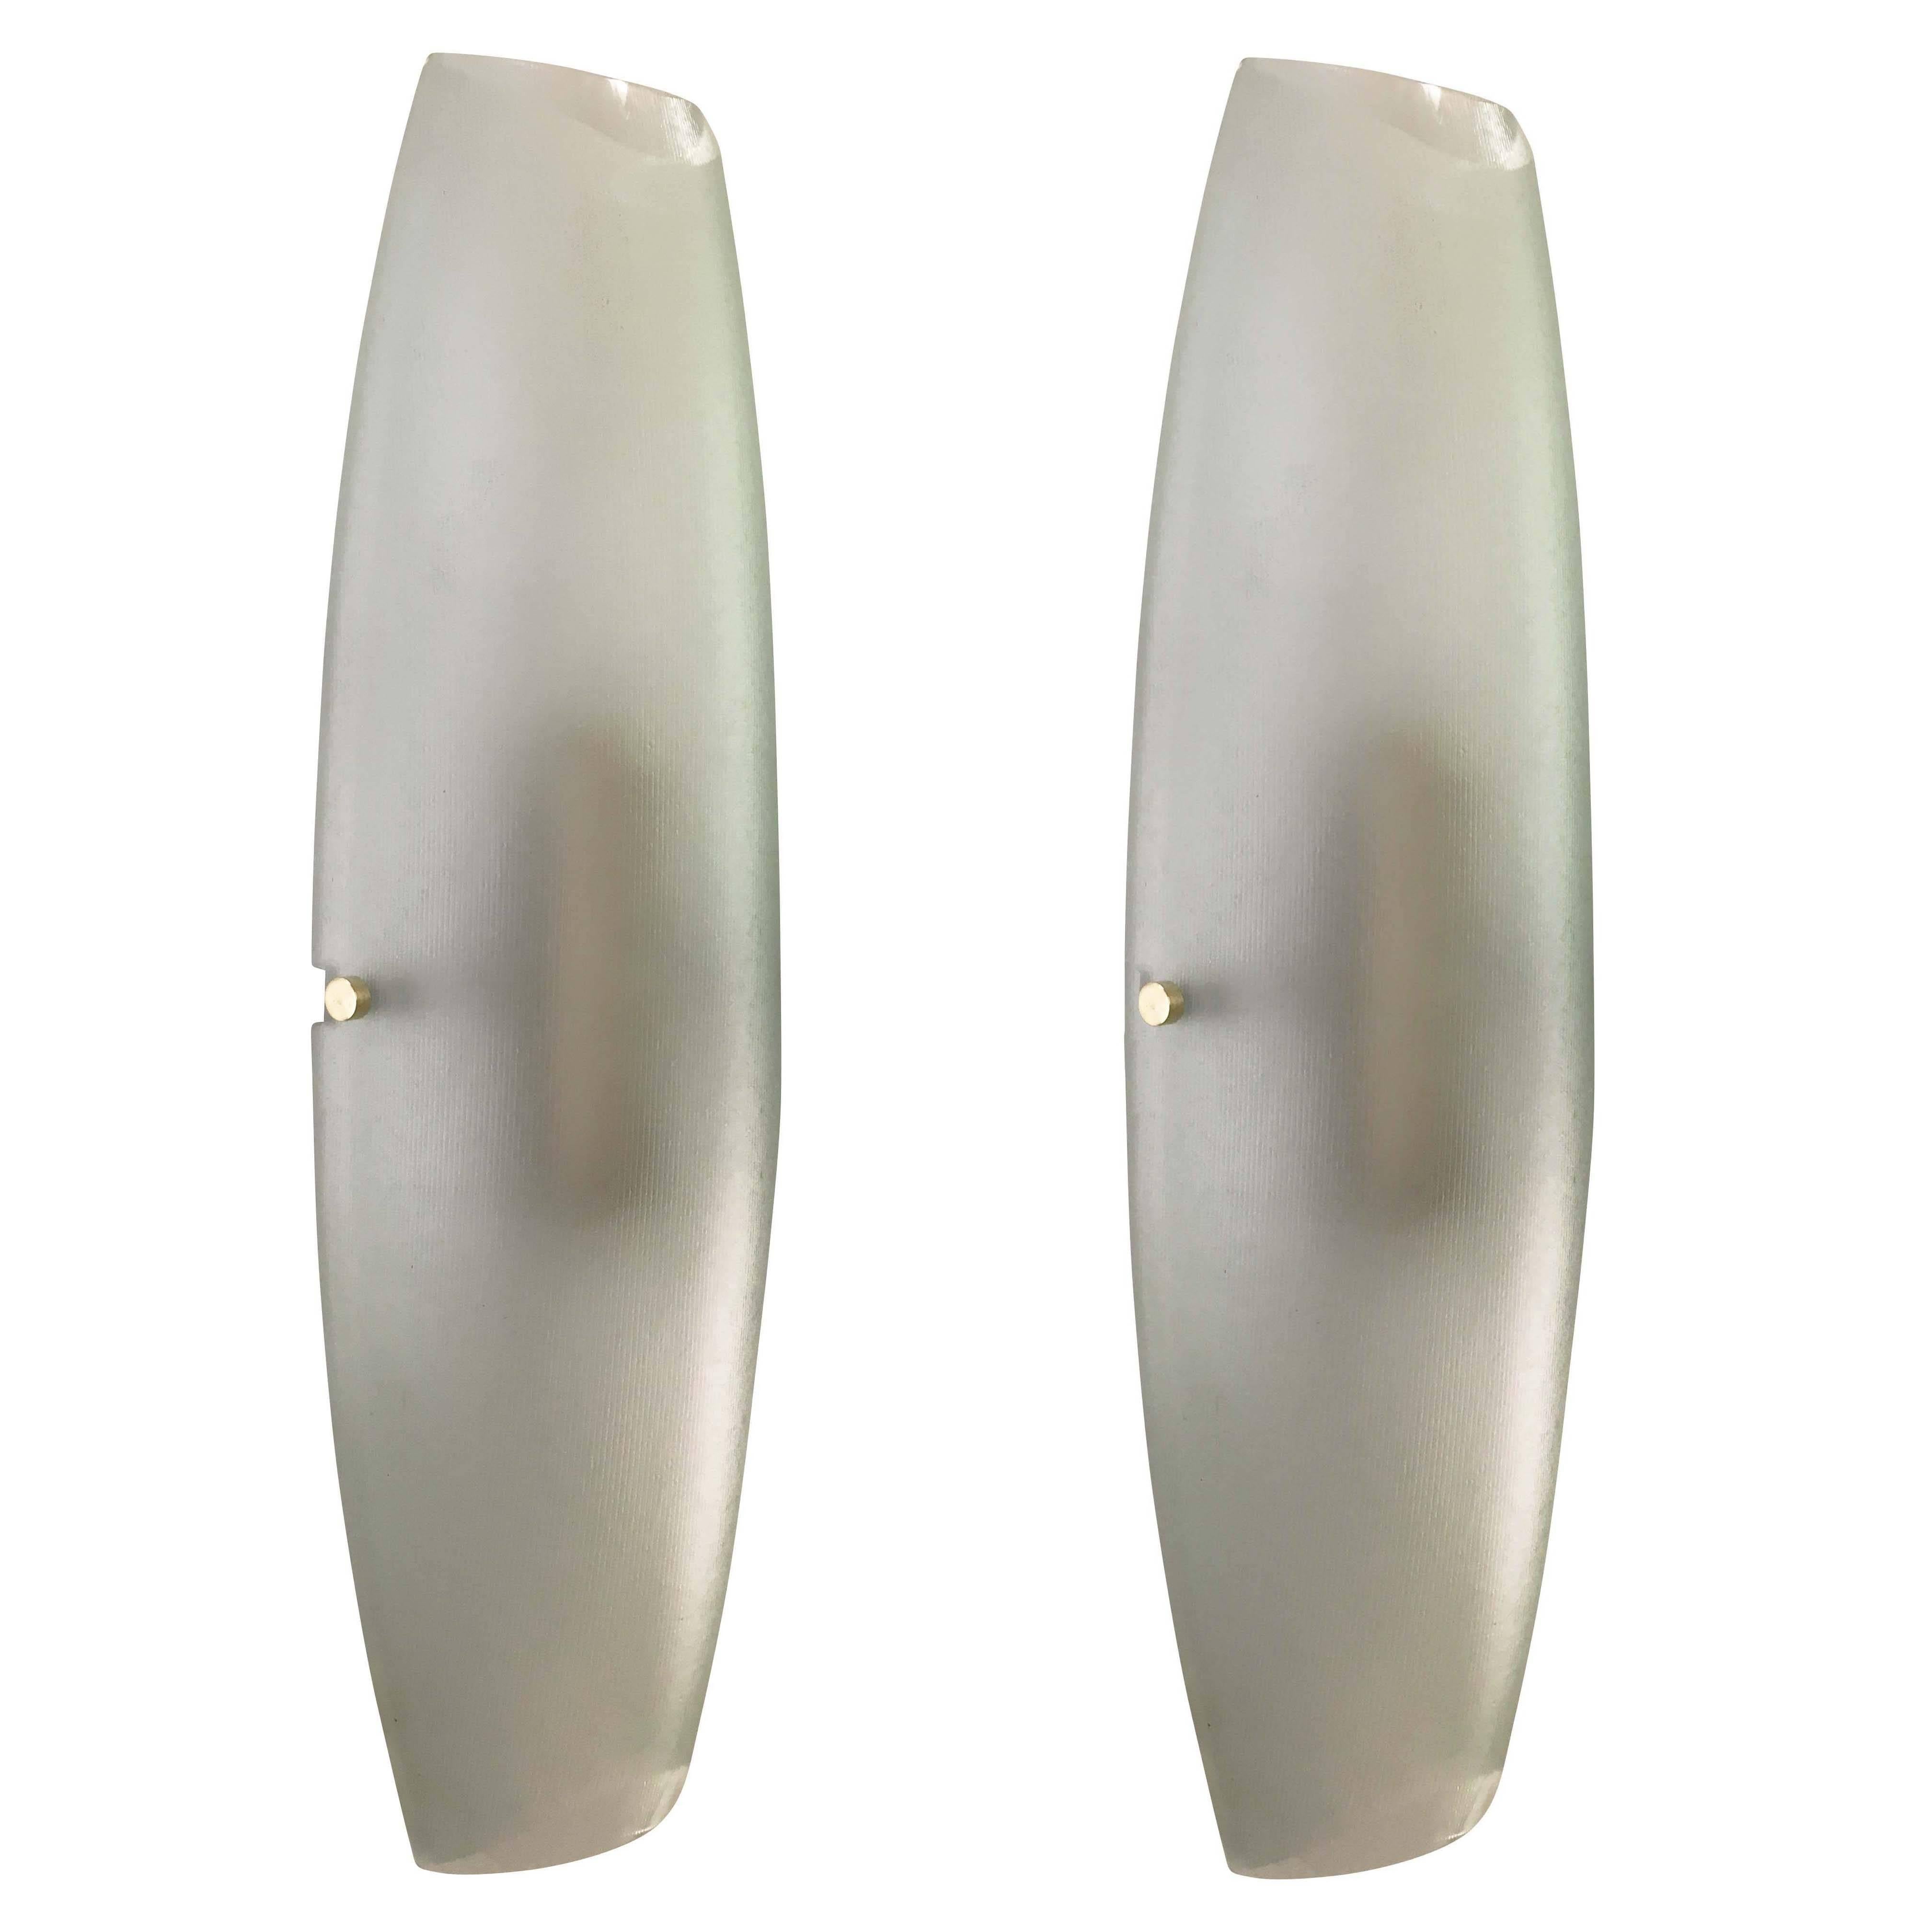 Fontana Arte wall lights model 2027 designed by Max Ingrand in the 1960s. Each features a light green ribbed glass on a white lacquered frame holding two candelabra sockets. To note are the exquisite details such as the brass fittings and glass ends